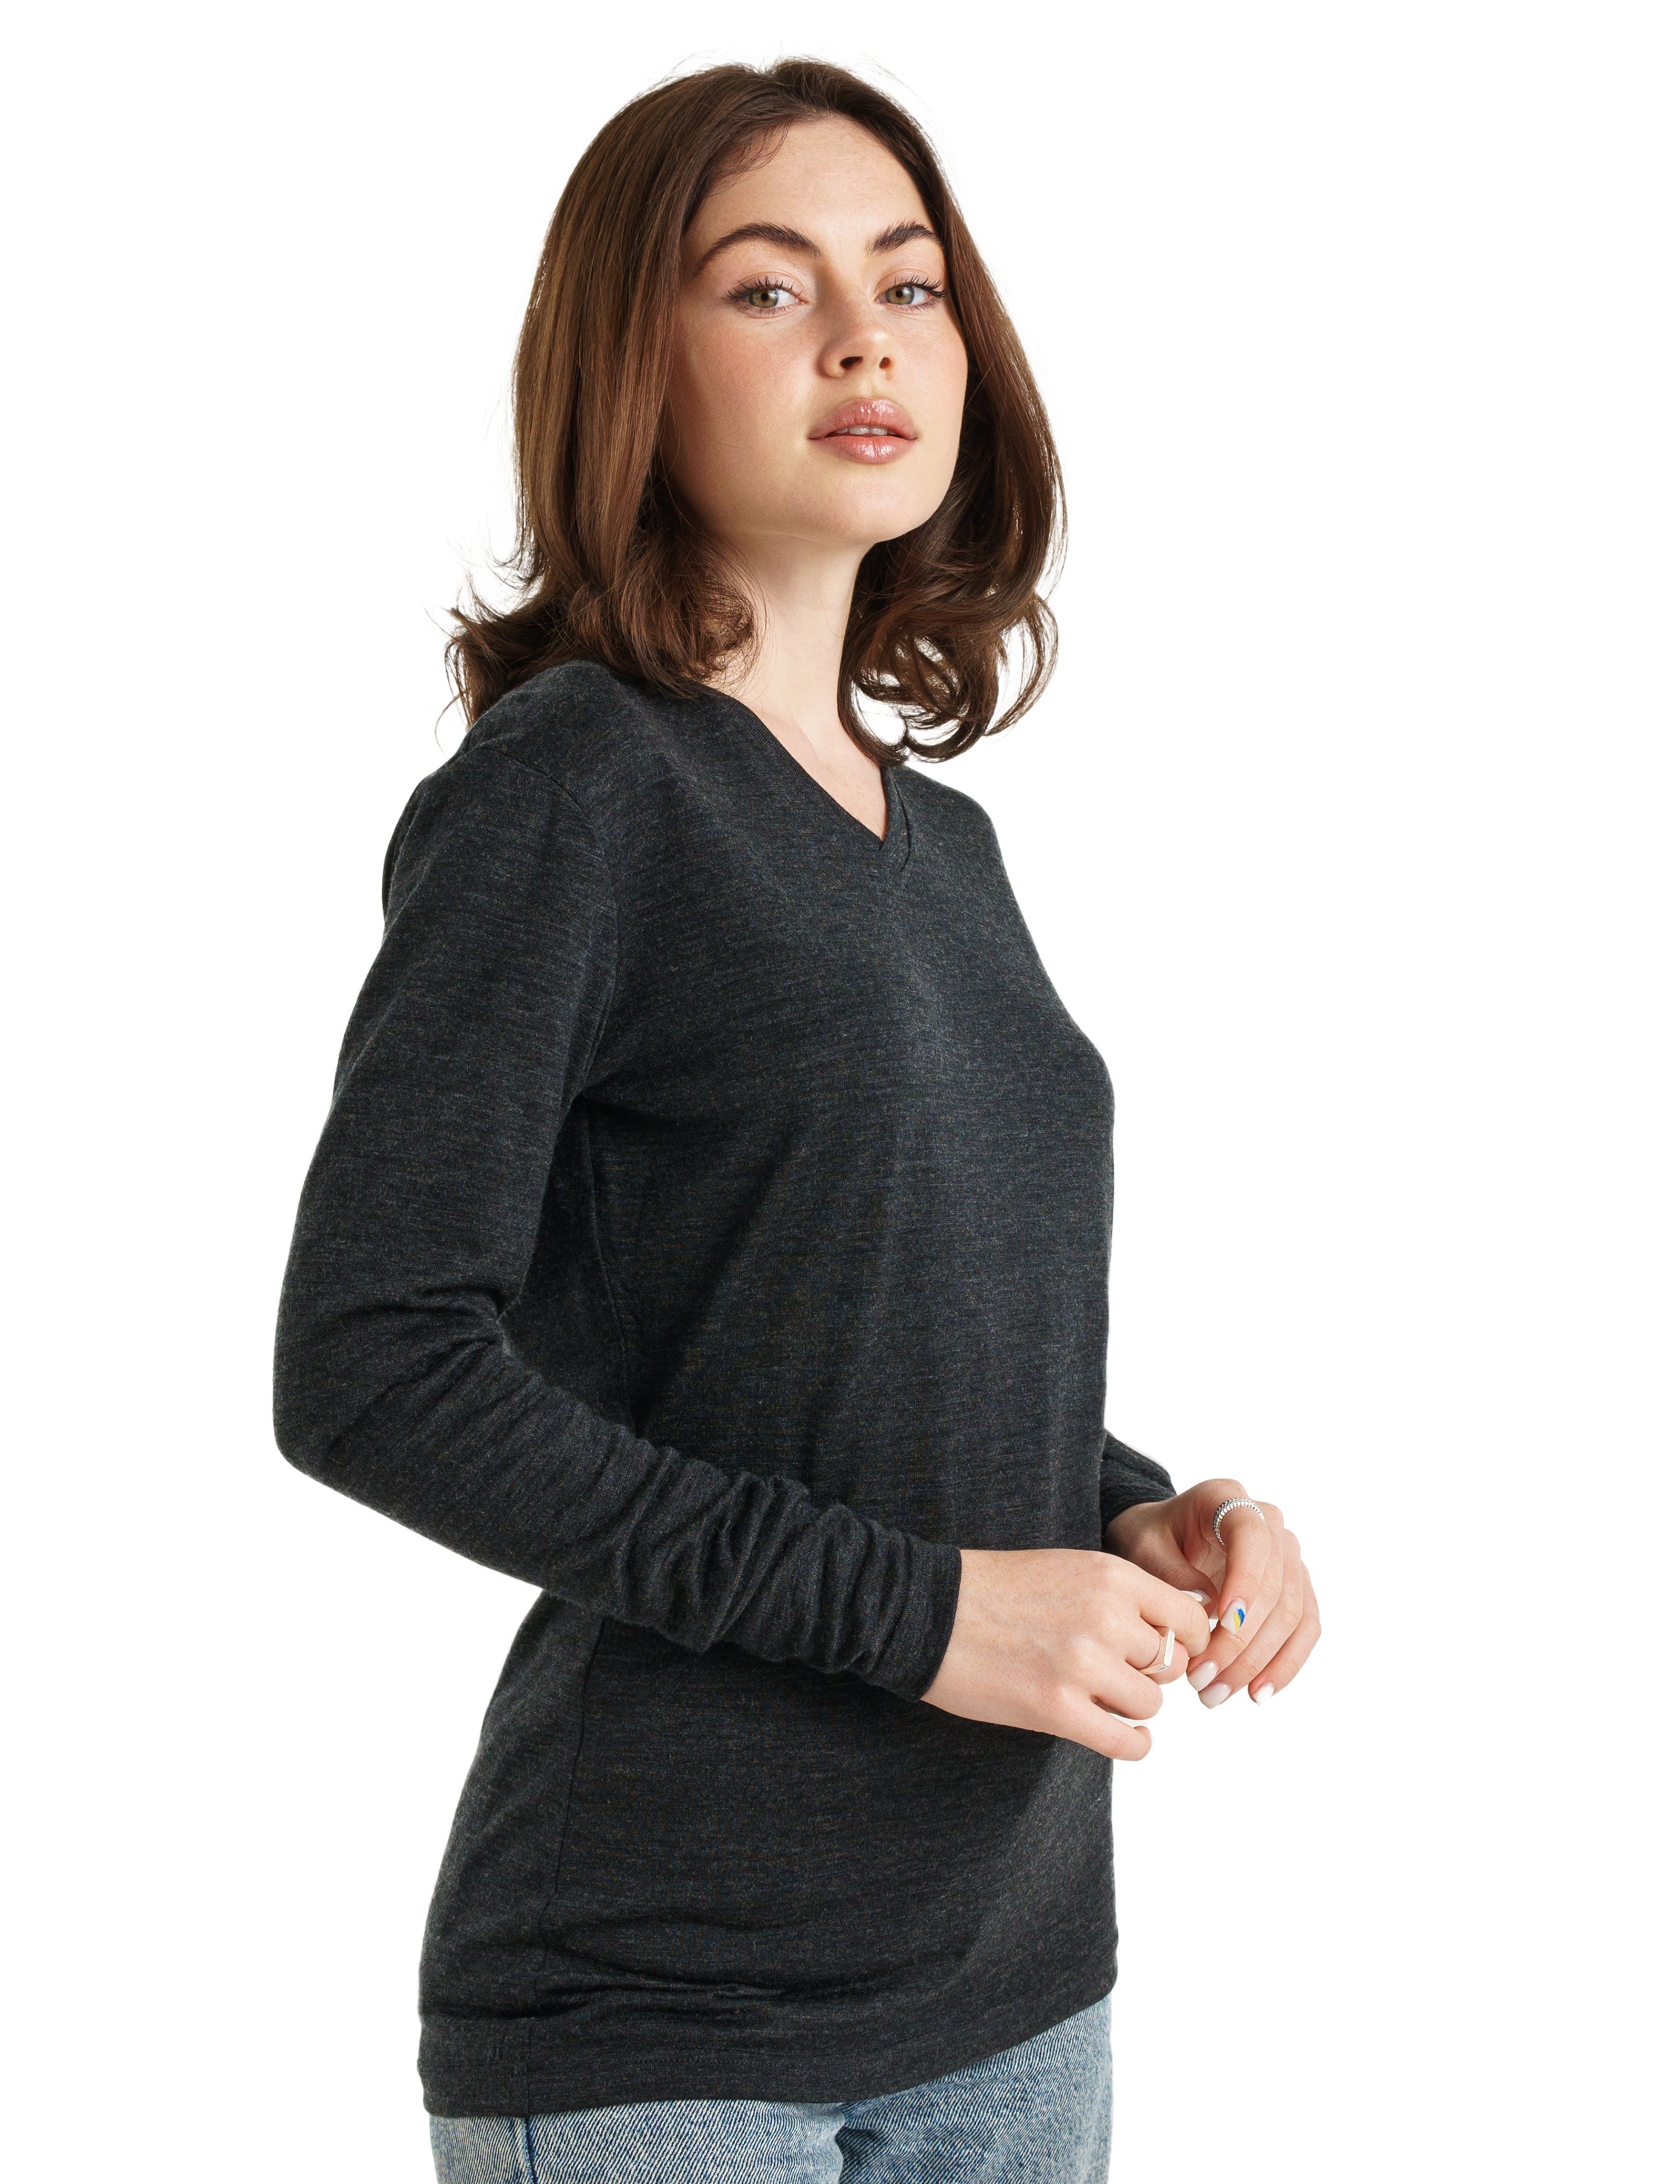 Merino Wool Women's Long Sleeve Thermal Underwear for Winter From China  Manufacturer - China Merino Wool Thermal Underwear and Merino Wool Base  Layer price